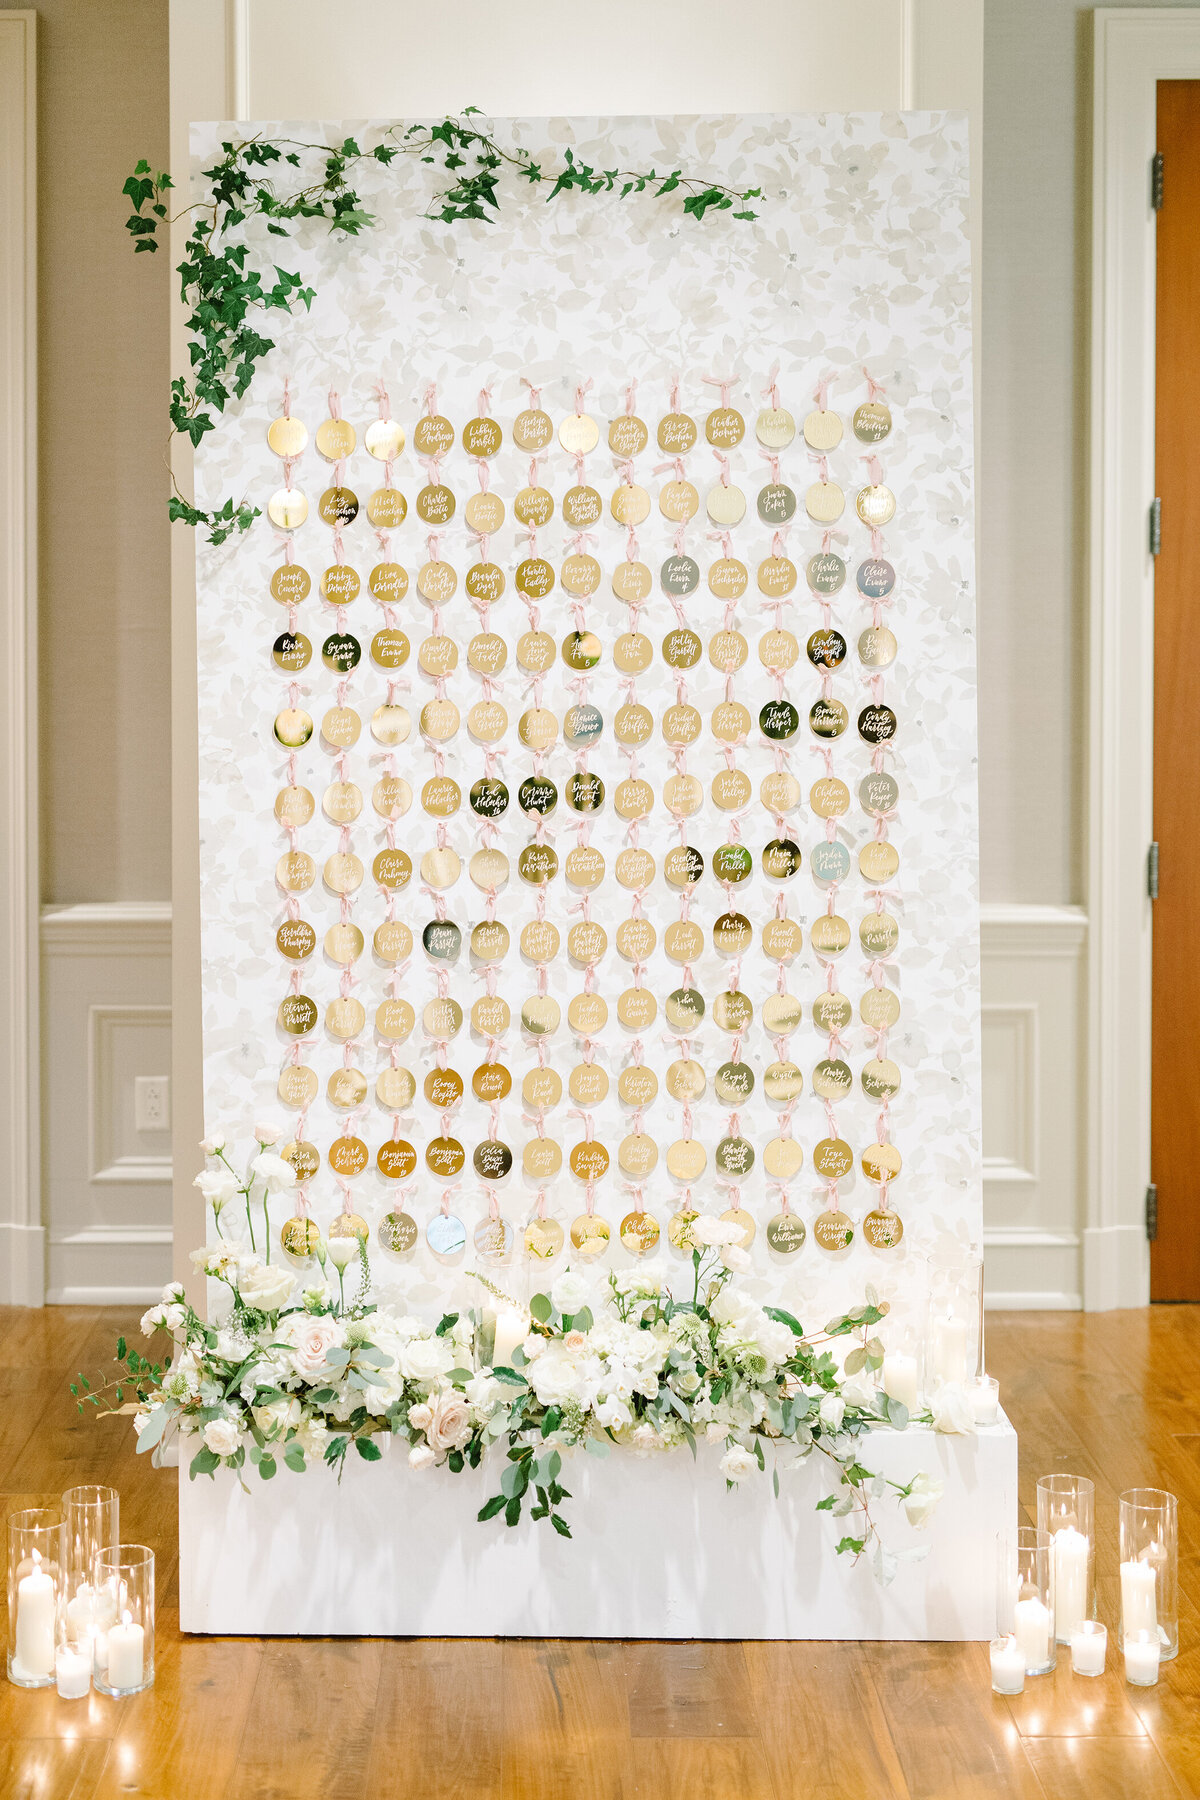 Laura Brooke + Ryan | Wedding at Hotel Bennett by Pure Luxe Bride: Charleston Wedding and Event Planners